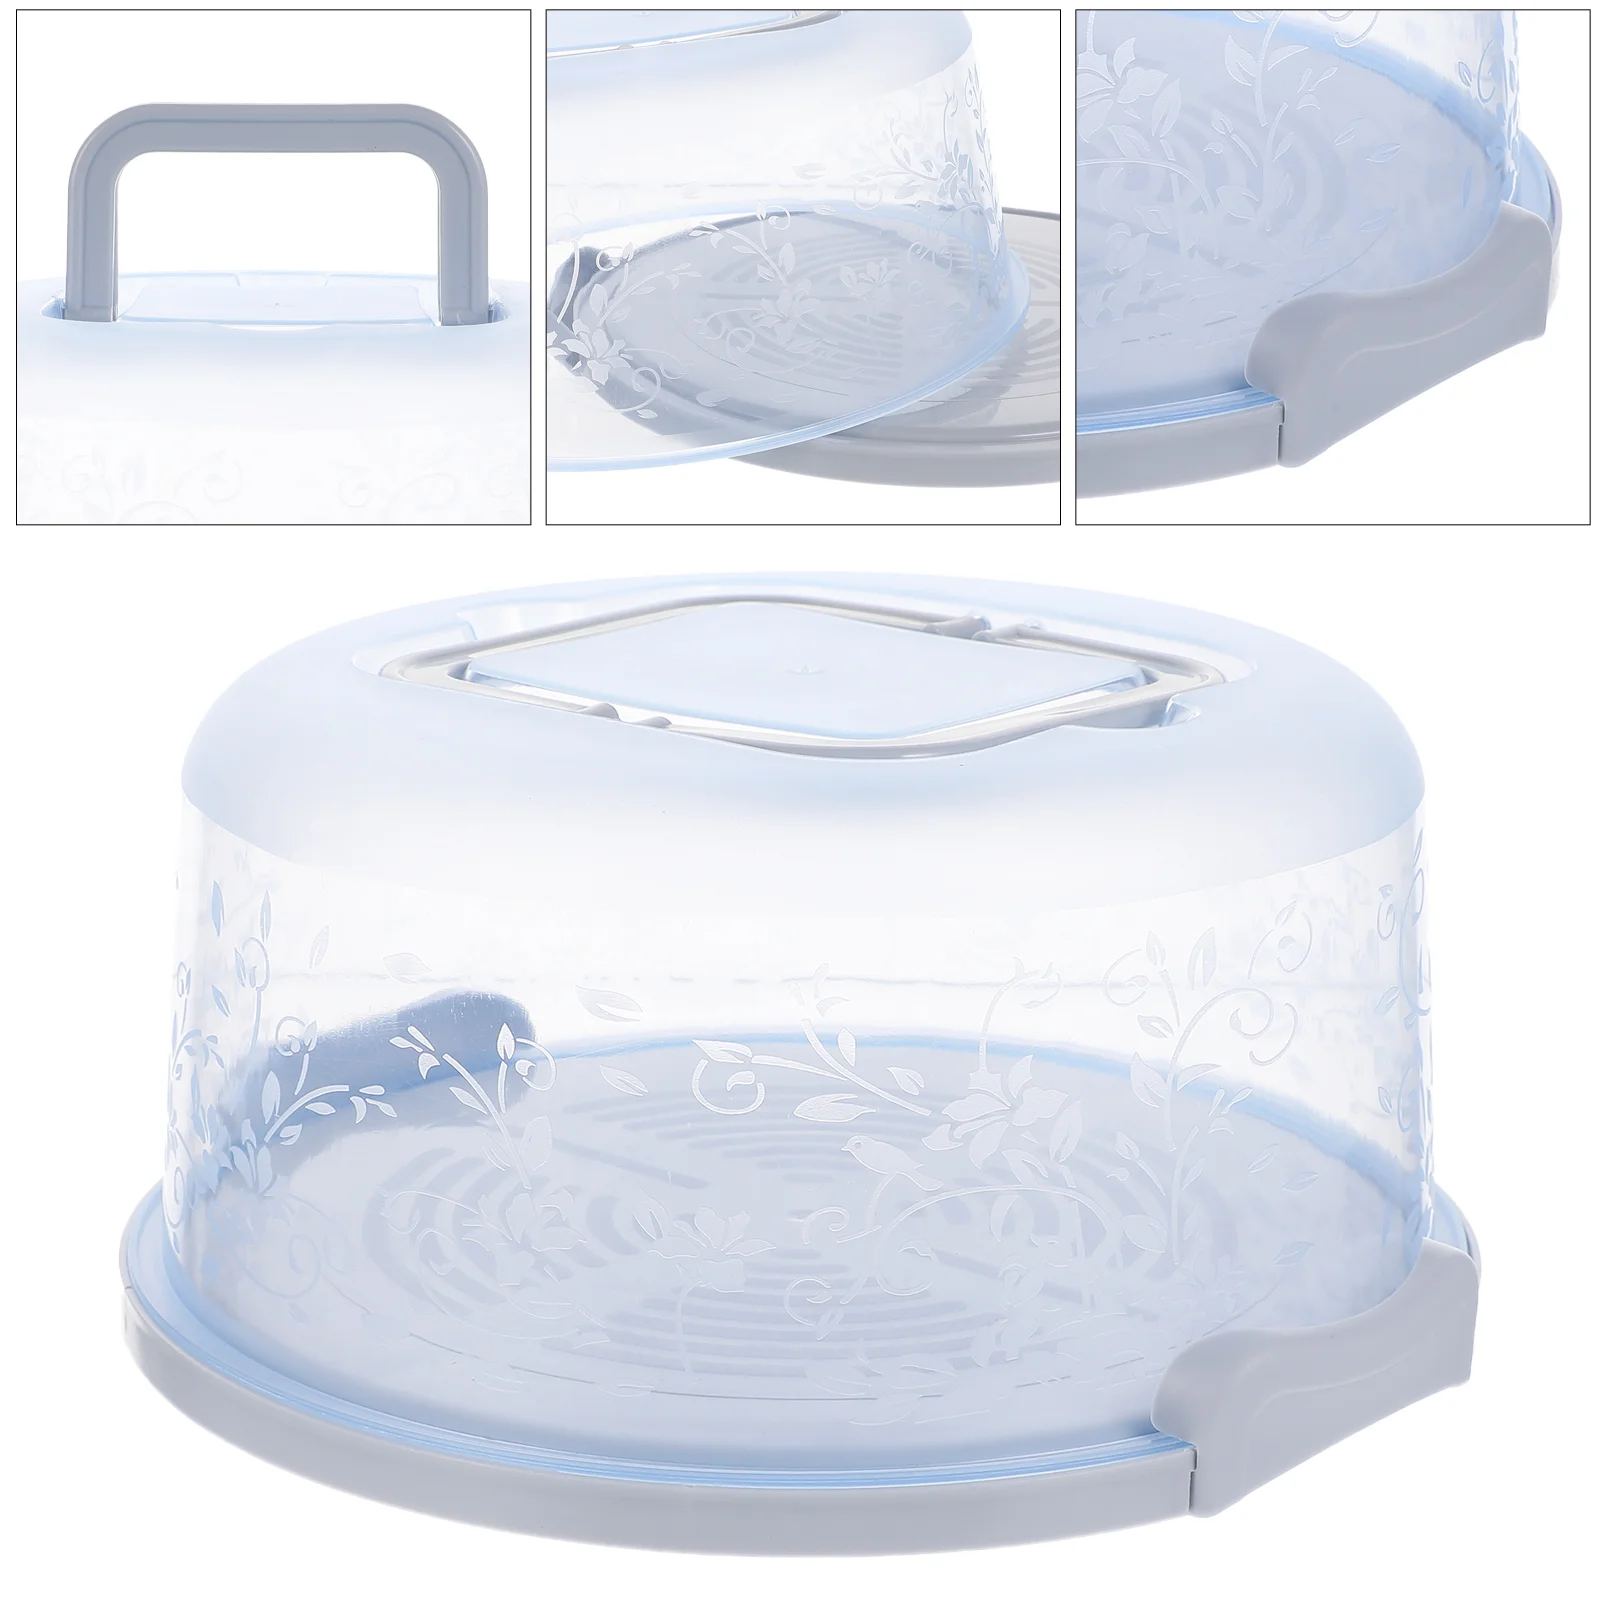 

Cake Carrier Box Holder Keeper Storage Container Cupcake Locking Dessert Portableclear Roundboxes Bakery Saver Pastry